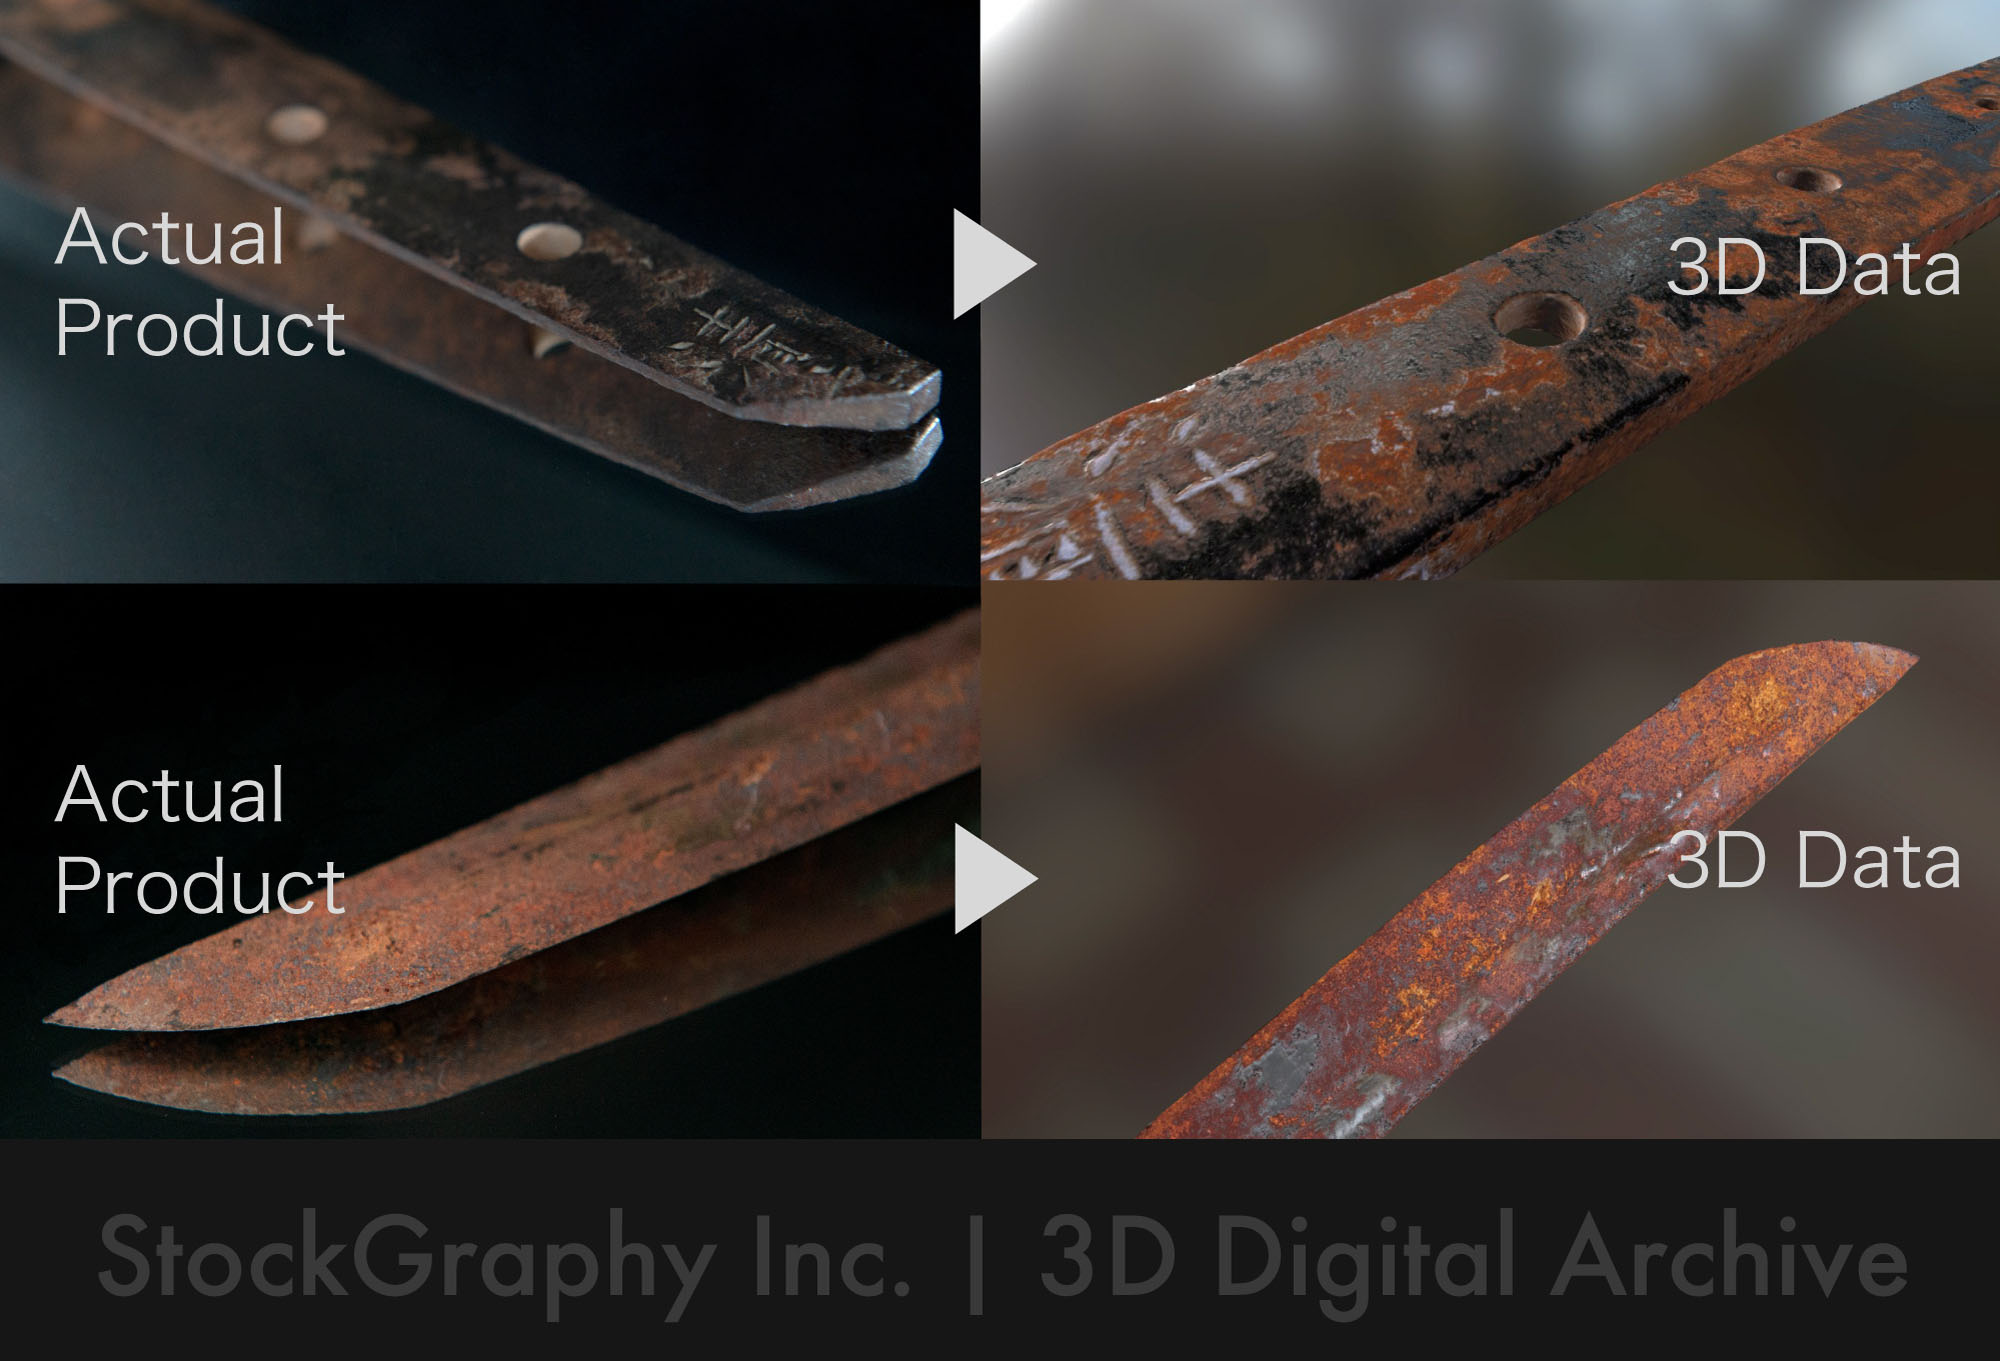 StockGraphy 3D Digital Archive